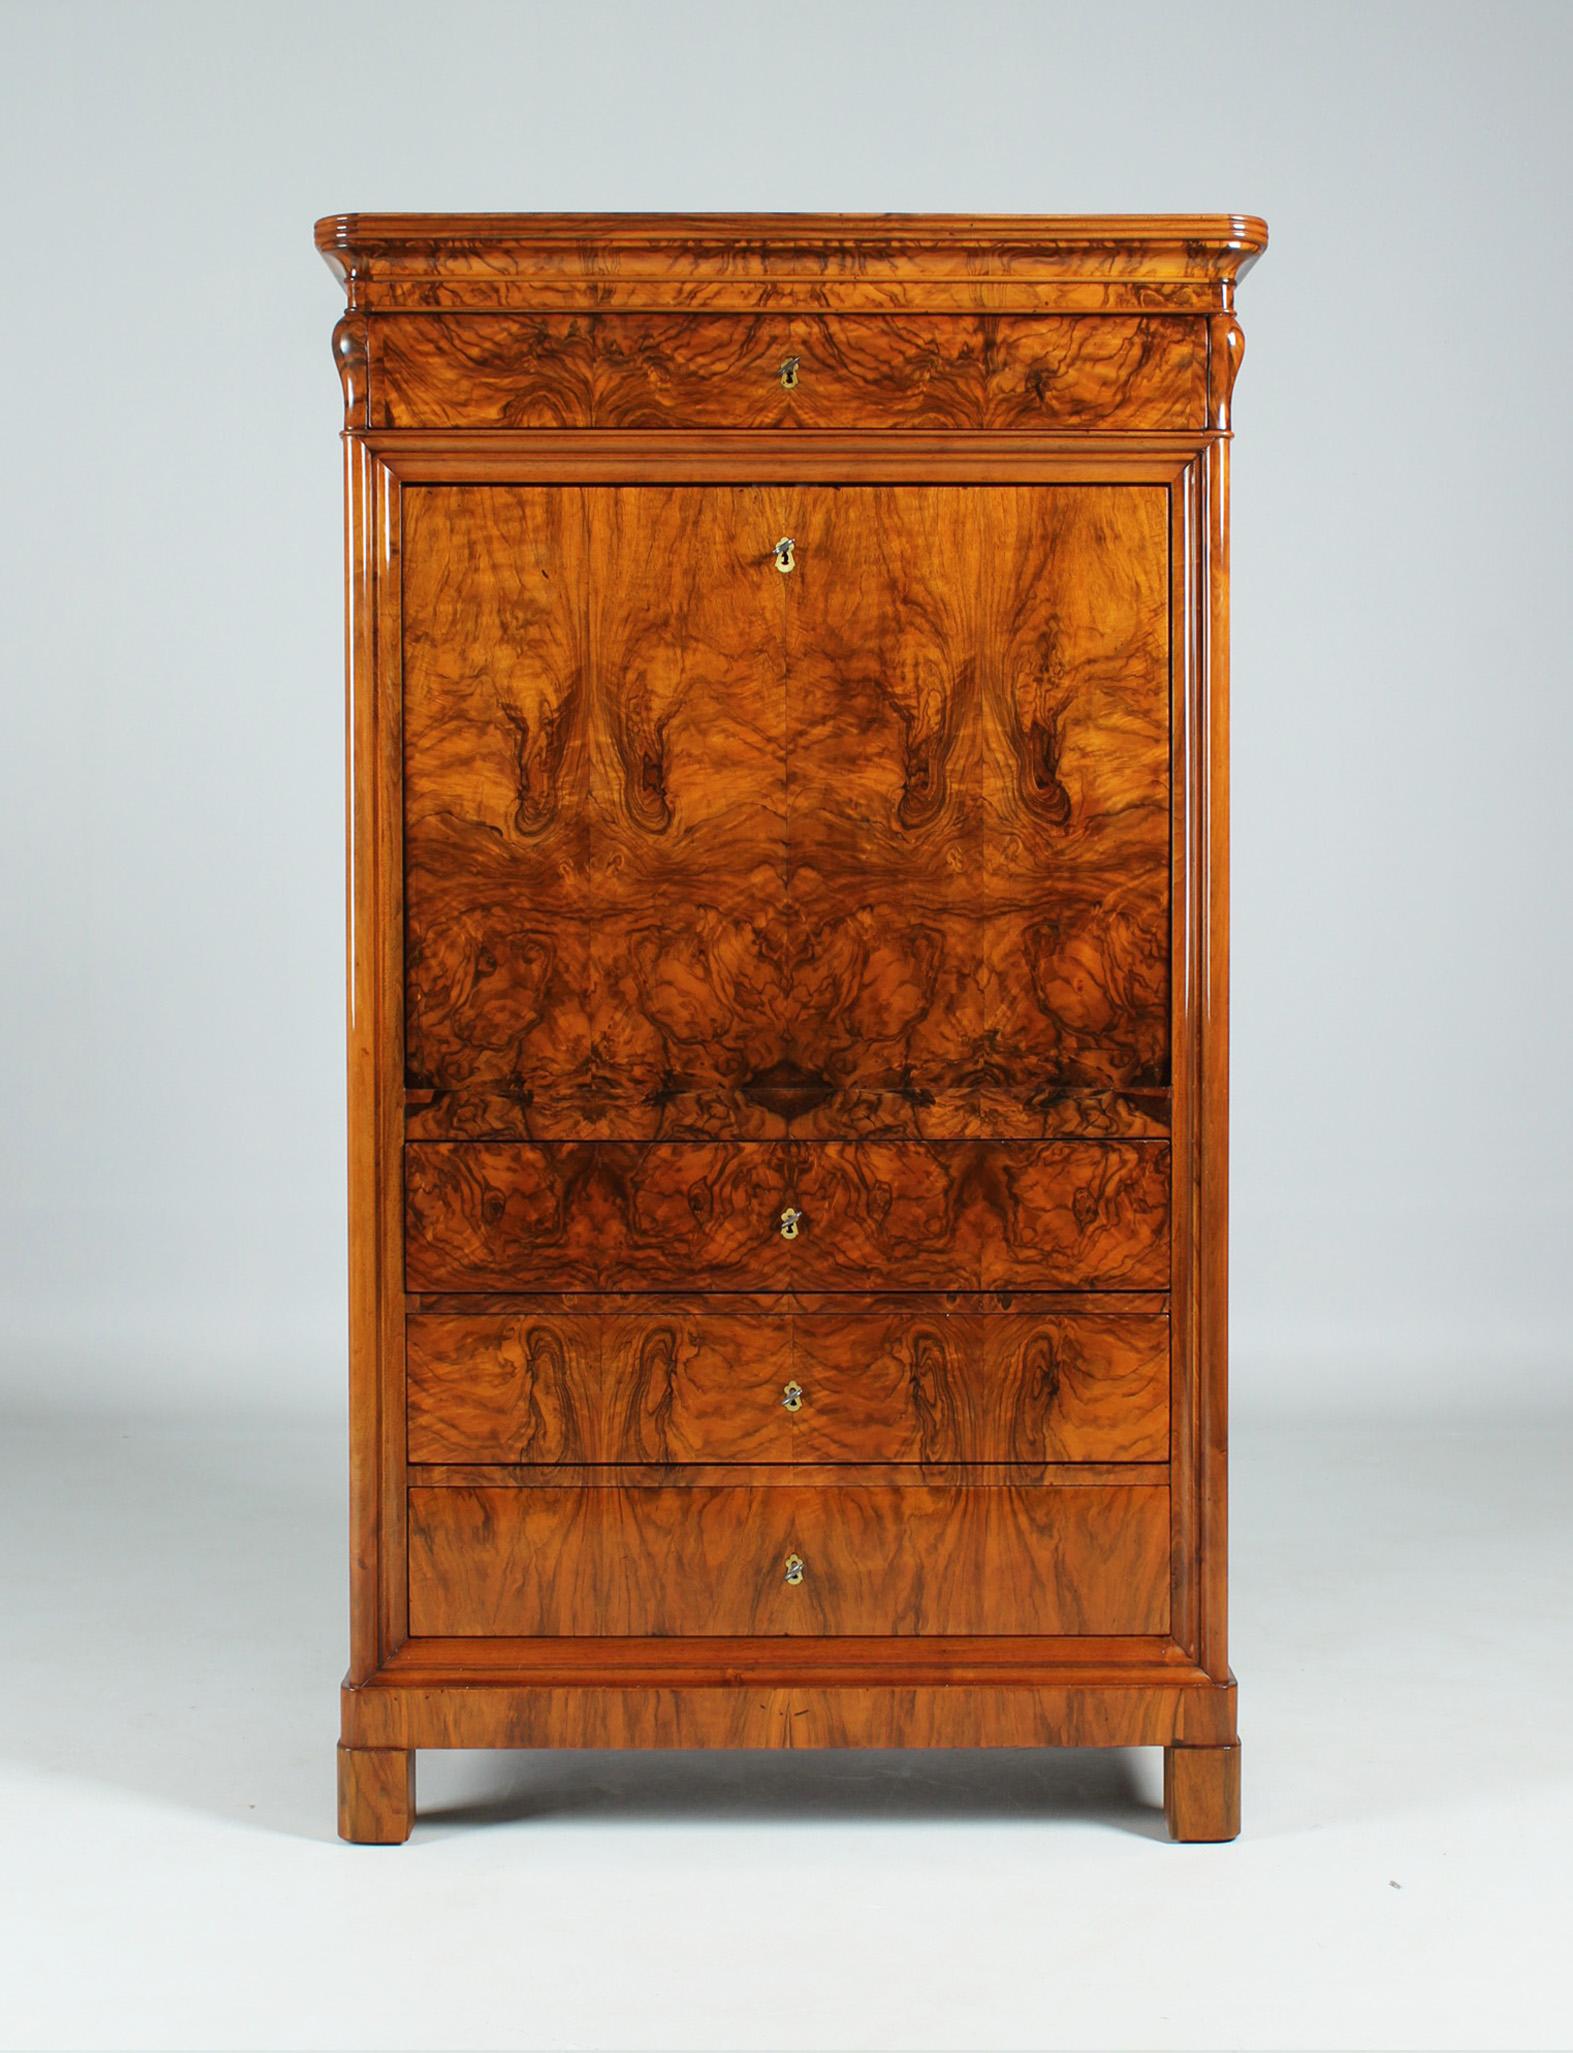 Narrow antique Biedermeier cabinet with secret compartment

Hesse/Palatinate
Walnut etc.
Biedermeier around 1840

Dimensions: H x W x D: 161 x 95 x 49 cm

Description:
Narrow, slender and well-proportioned secretary from the late